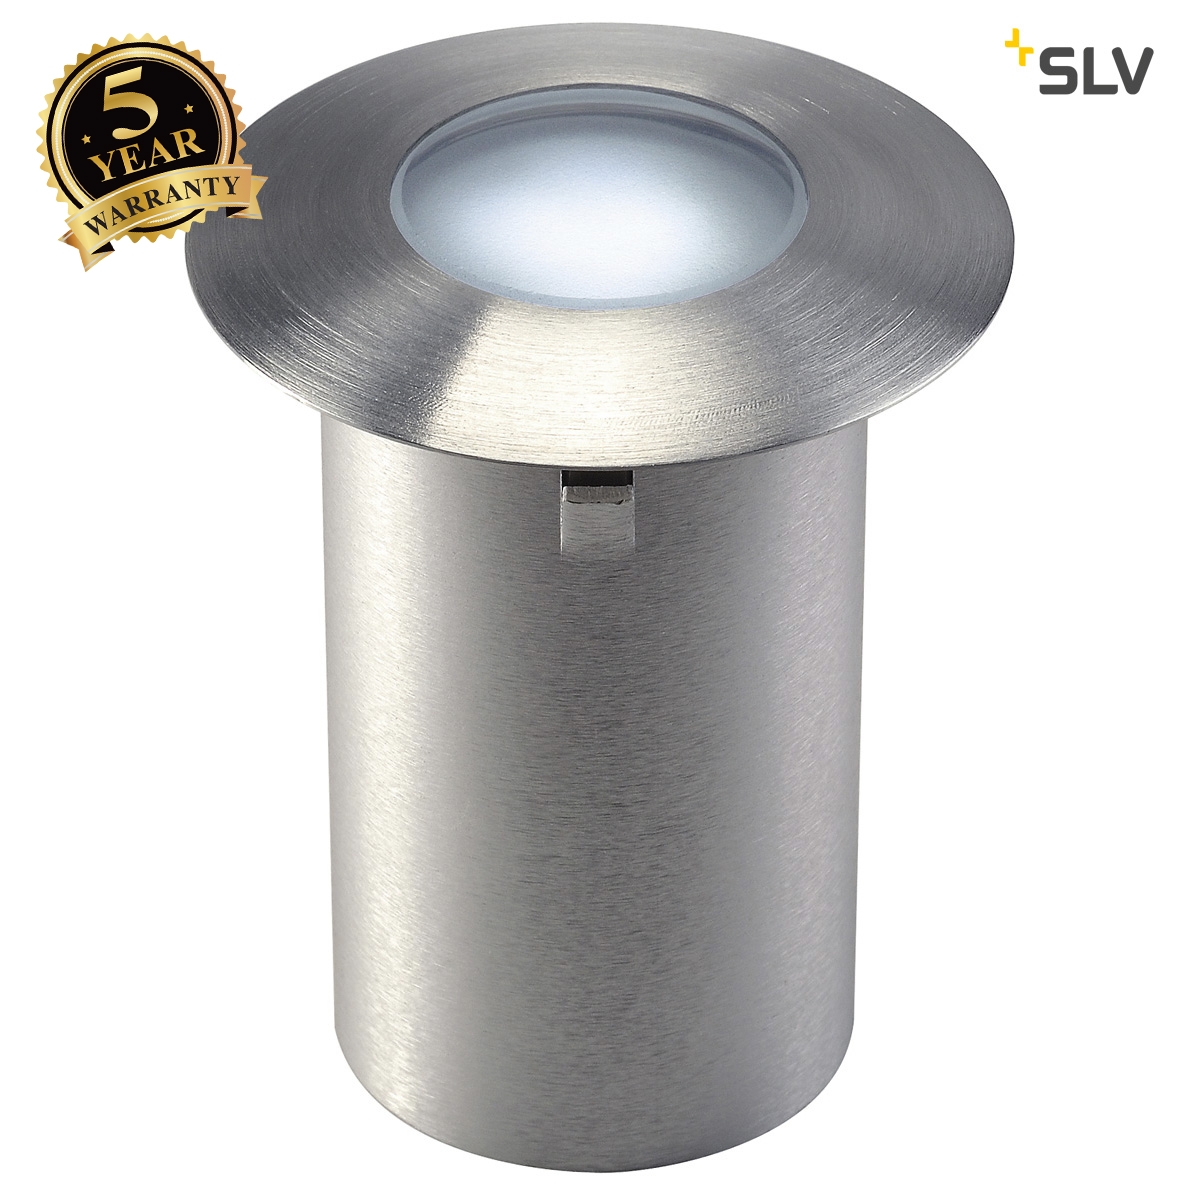 SLV TRAIL-LITE recessed fitting, stainless steel 316, 4 LED, 0.3W, 6500K 227461